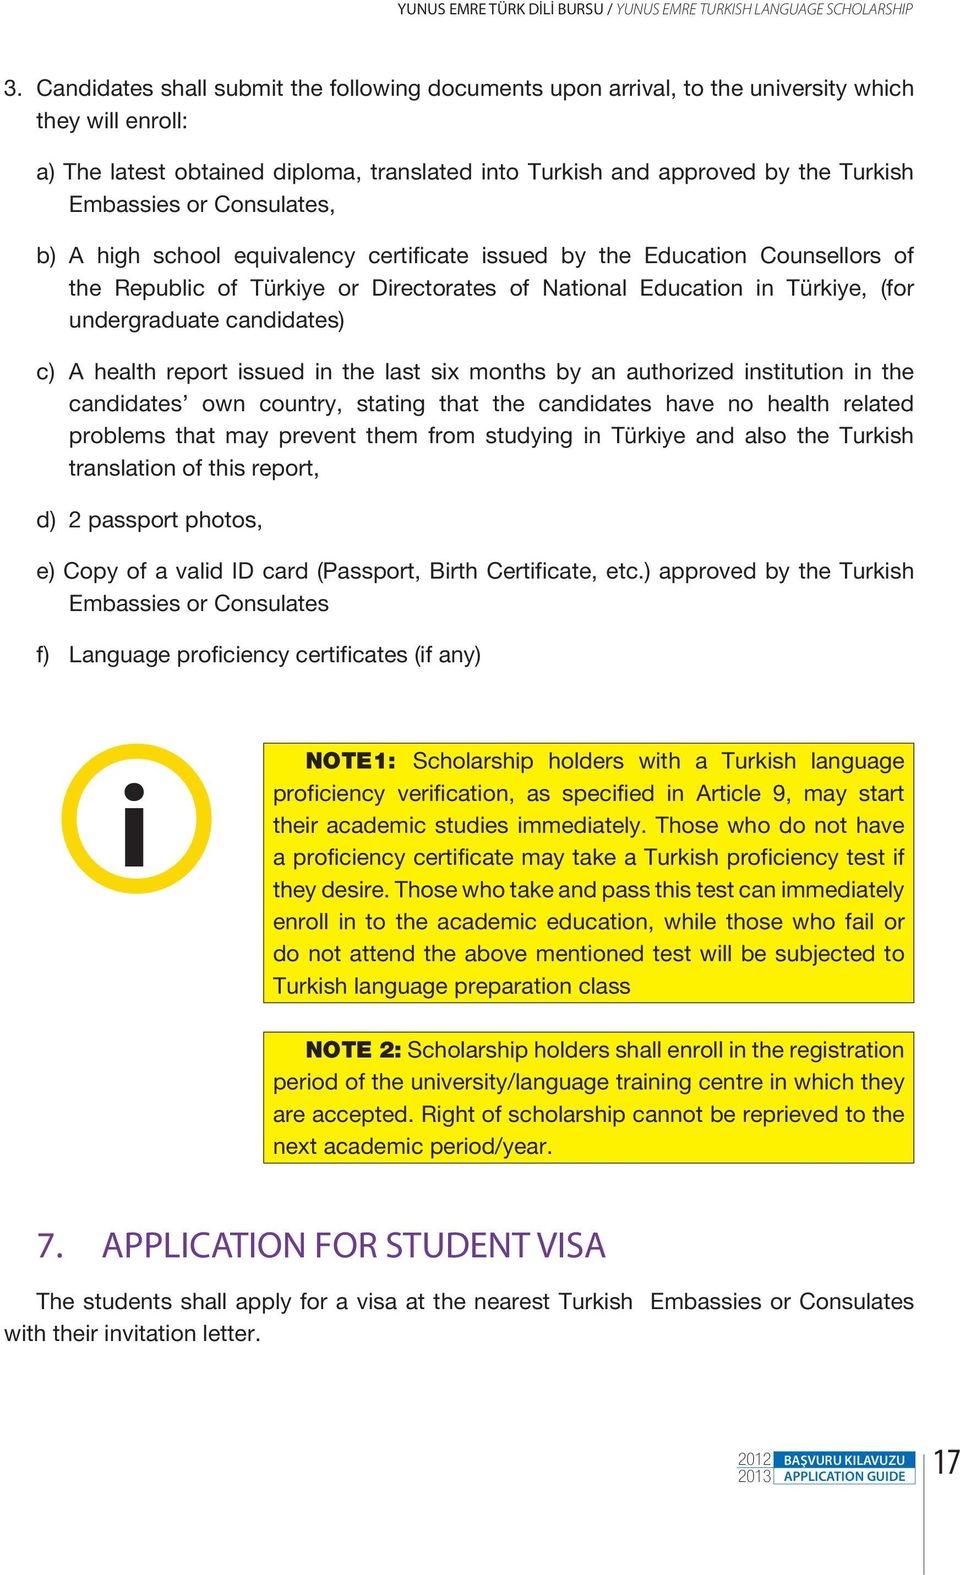 or Consulates, b) A high school equivalency certificate issued by the Education Counsellors of the Republic of Türkiye or Directorates of National Education in Türkiye, (for undergraduate candidates)